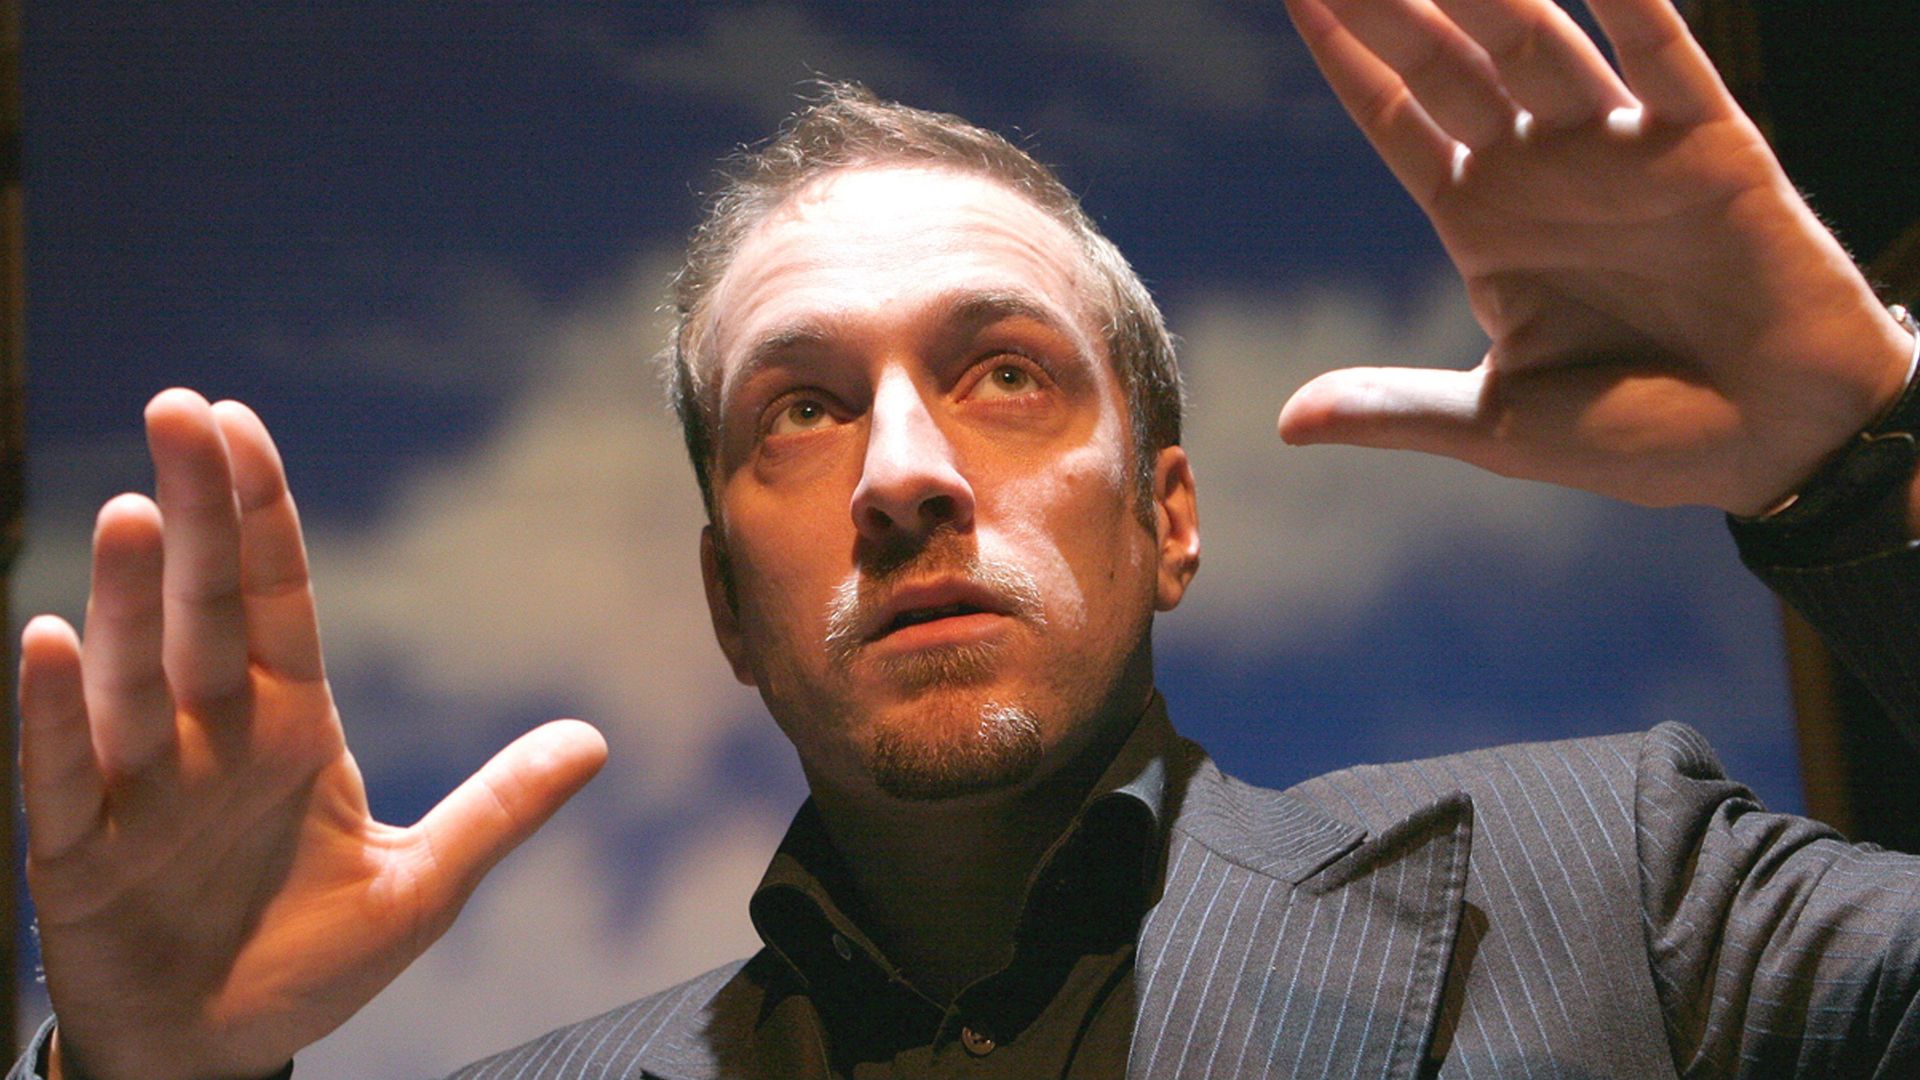 Derren Brown: Something Wicked This Way Comes Backdrop